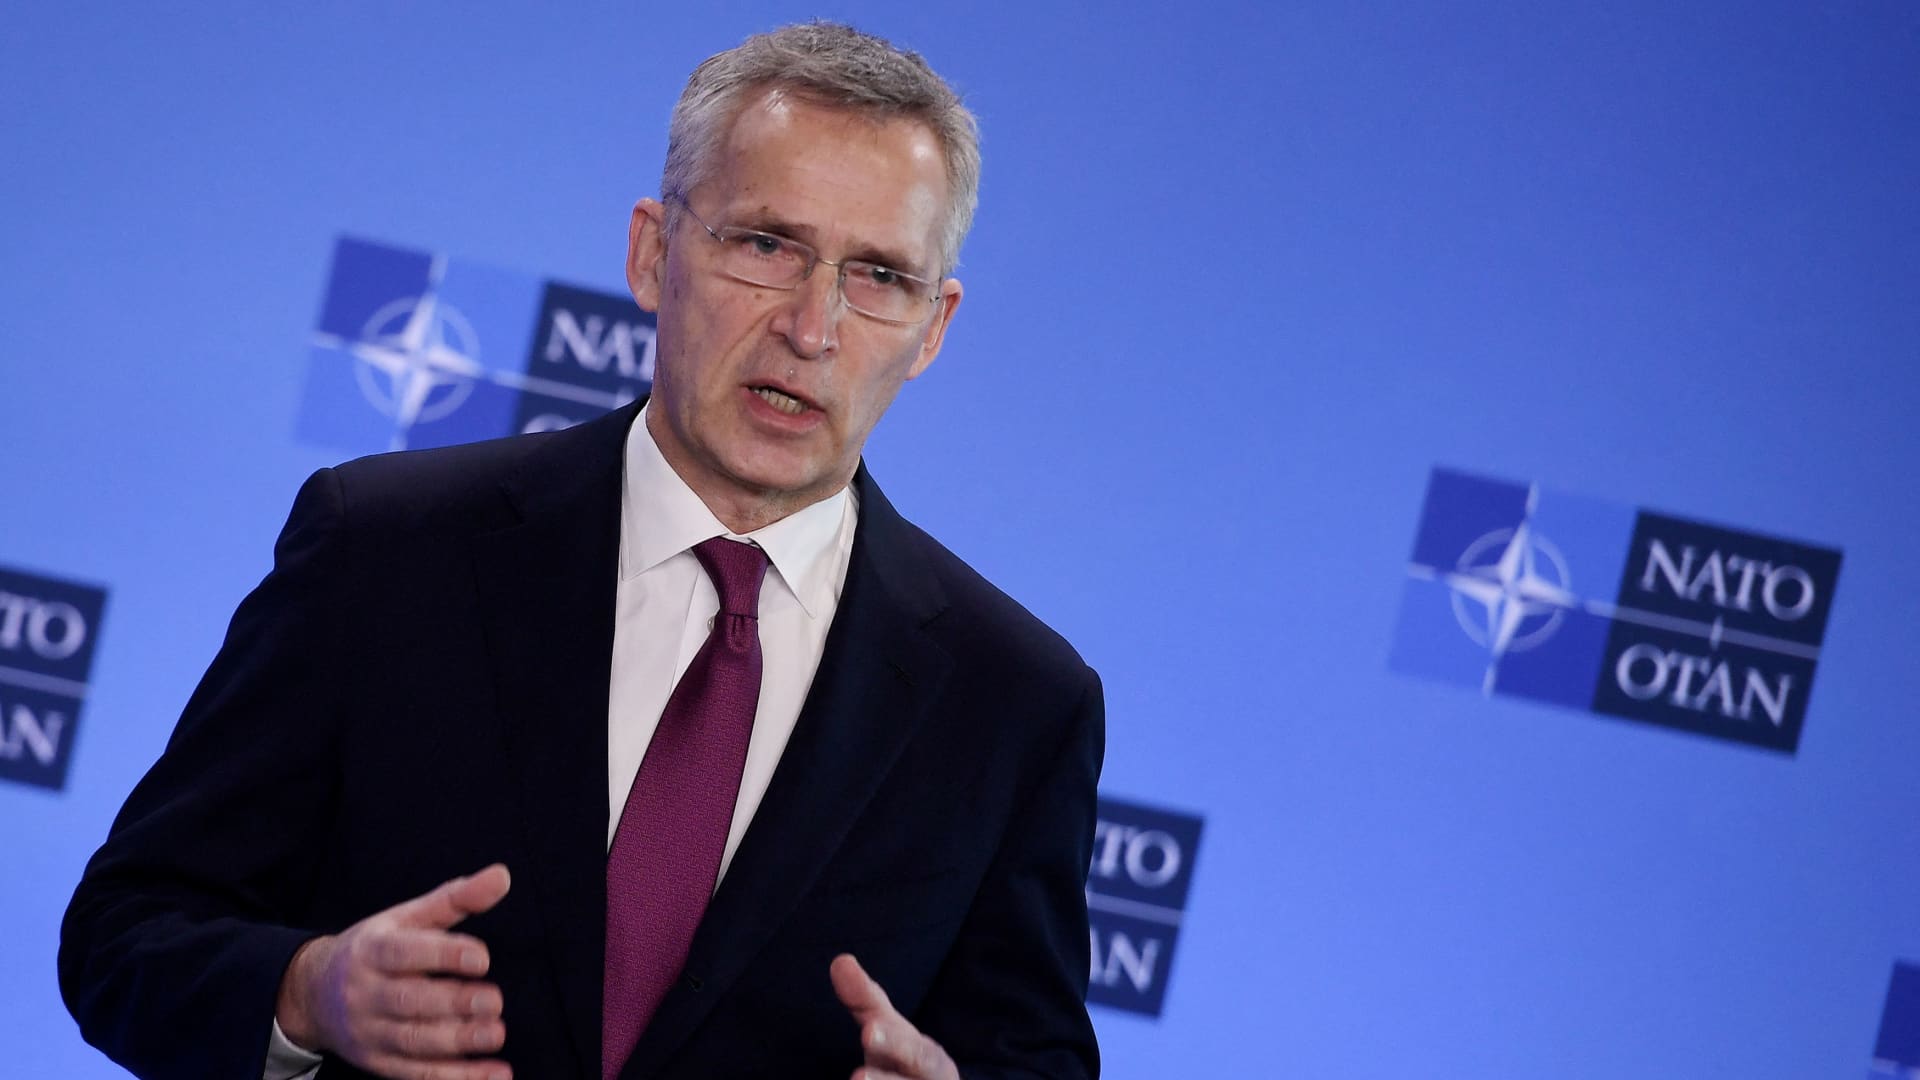 NATO Secretary General Jens Stoltenberg speaks to the media along side the US Secretary of State, prior to the start of a NATO foreign ministers' meeting following Russia's invasion of Ukraine, at the Alliance's headquarters in Brussels, Belgium, March 4, 2022.